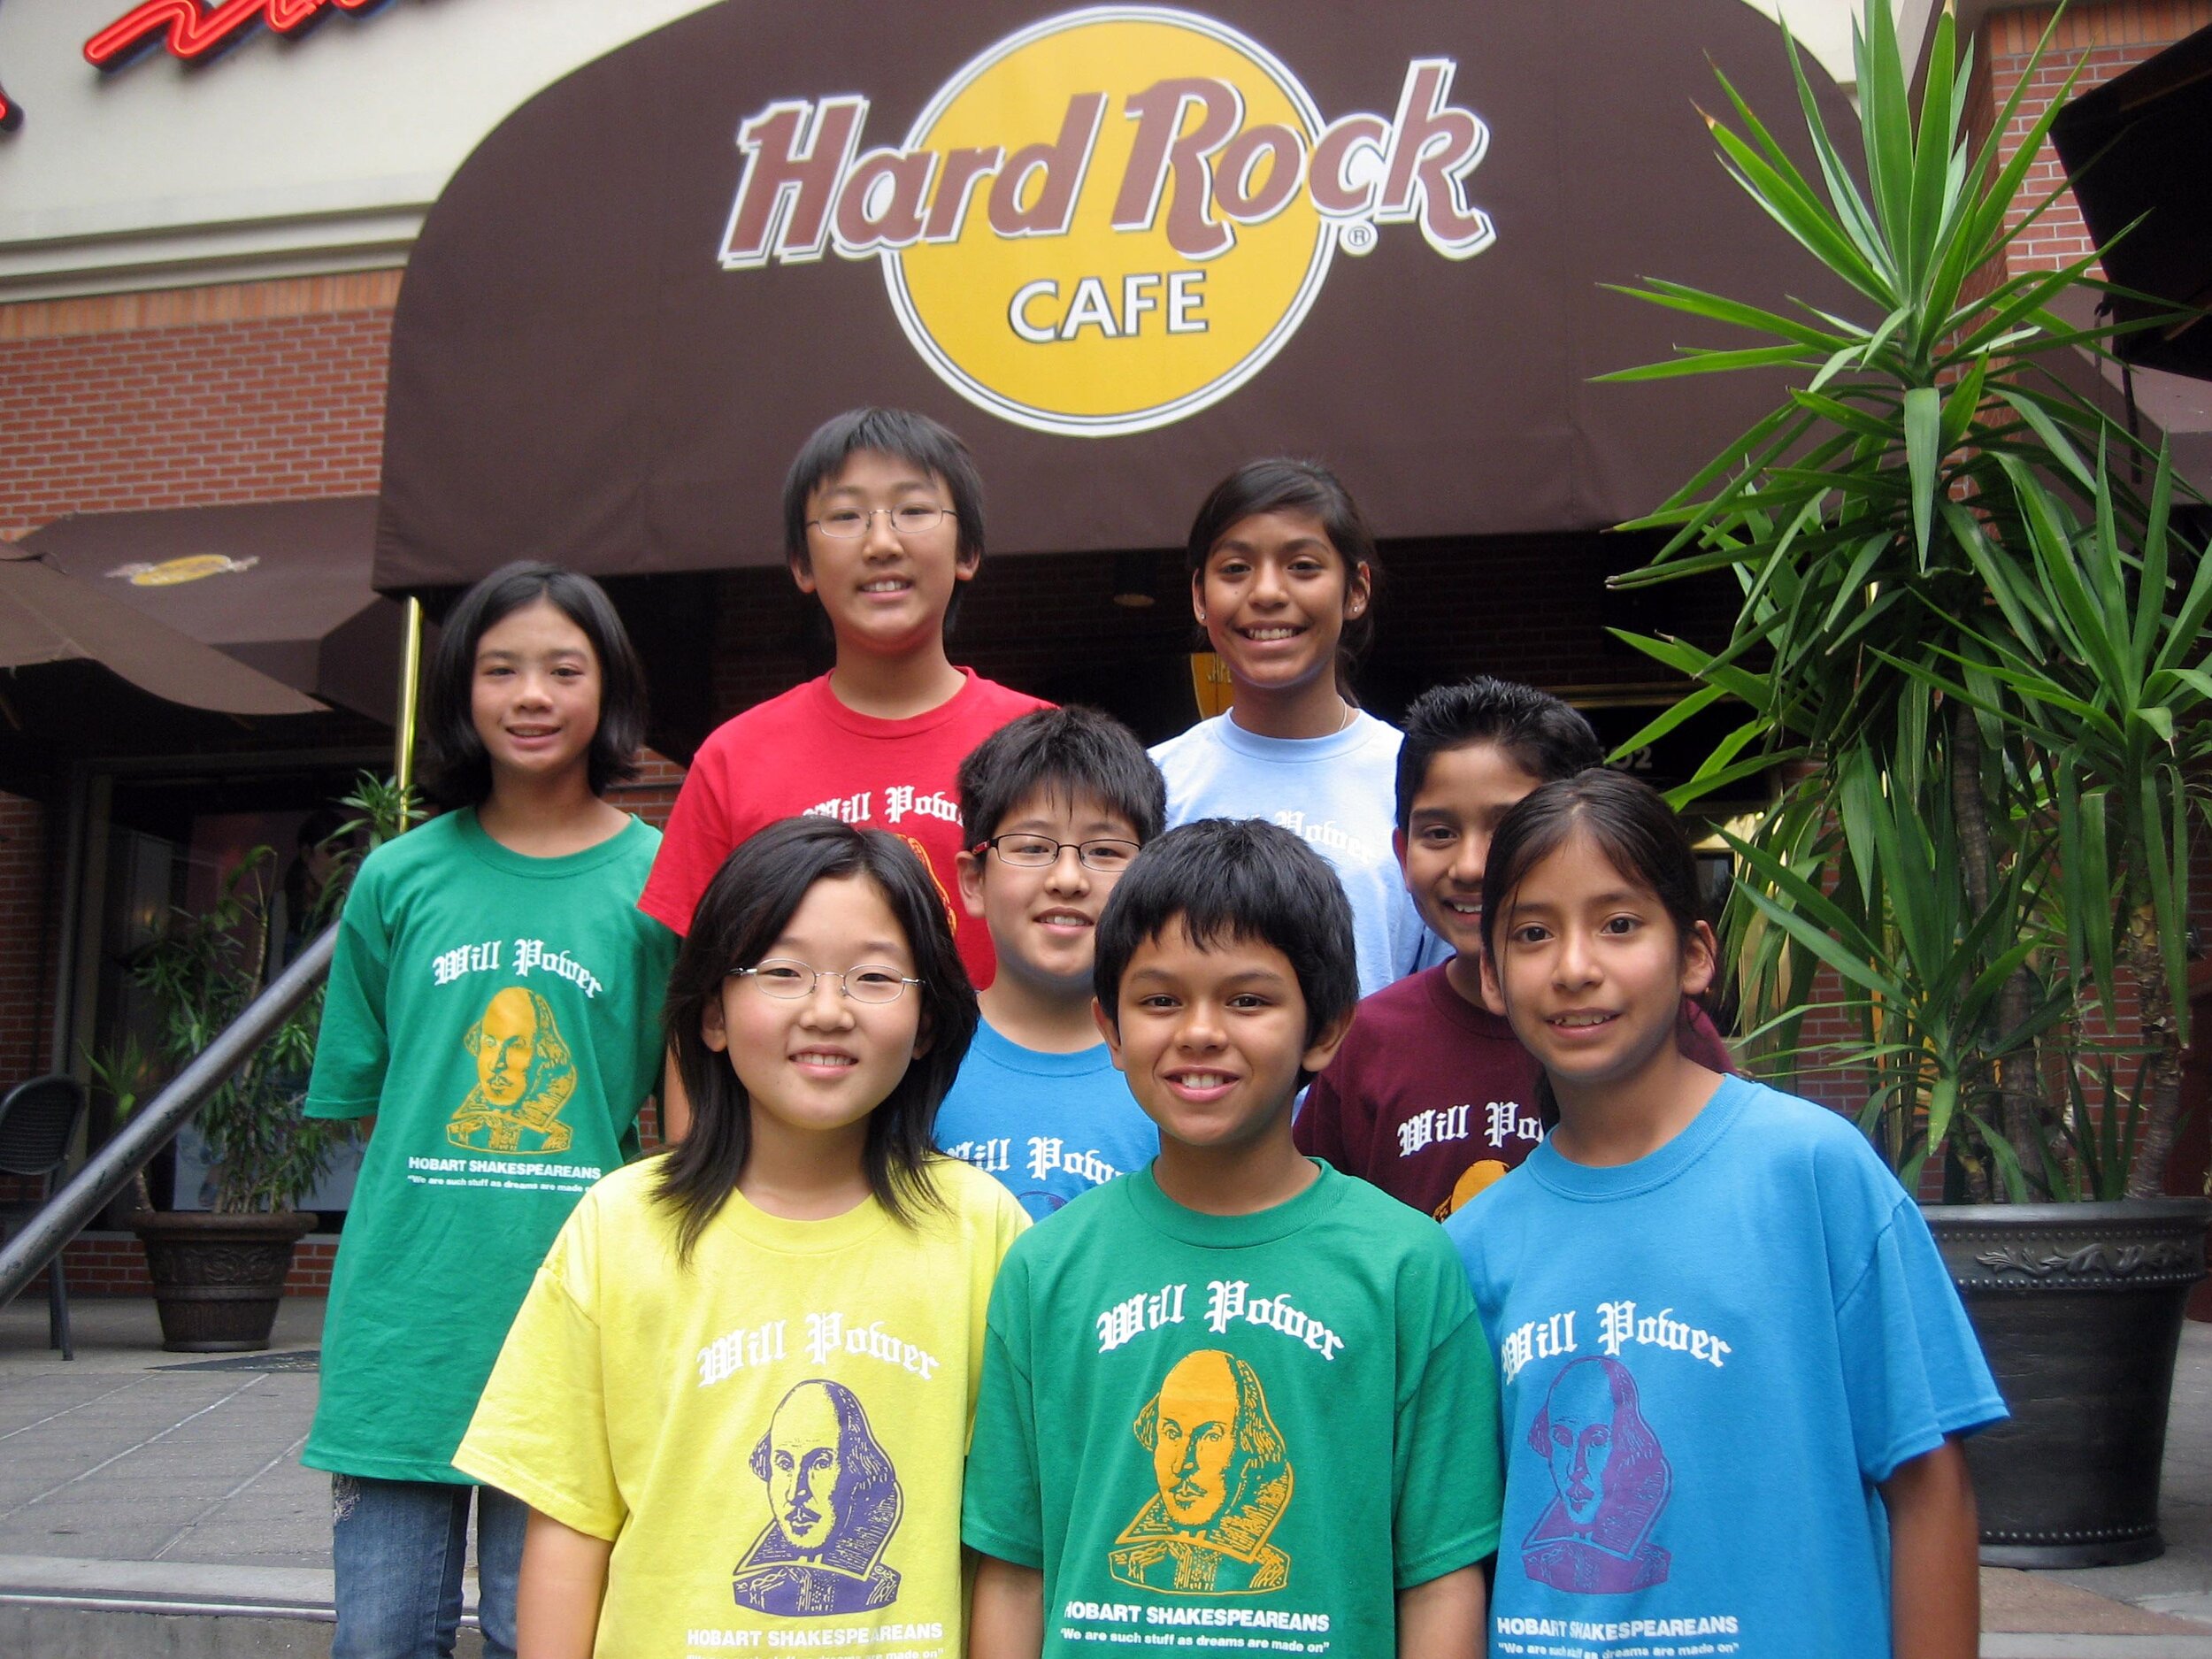  Food means smiles at the Hard Rock in Houston 